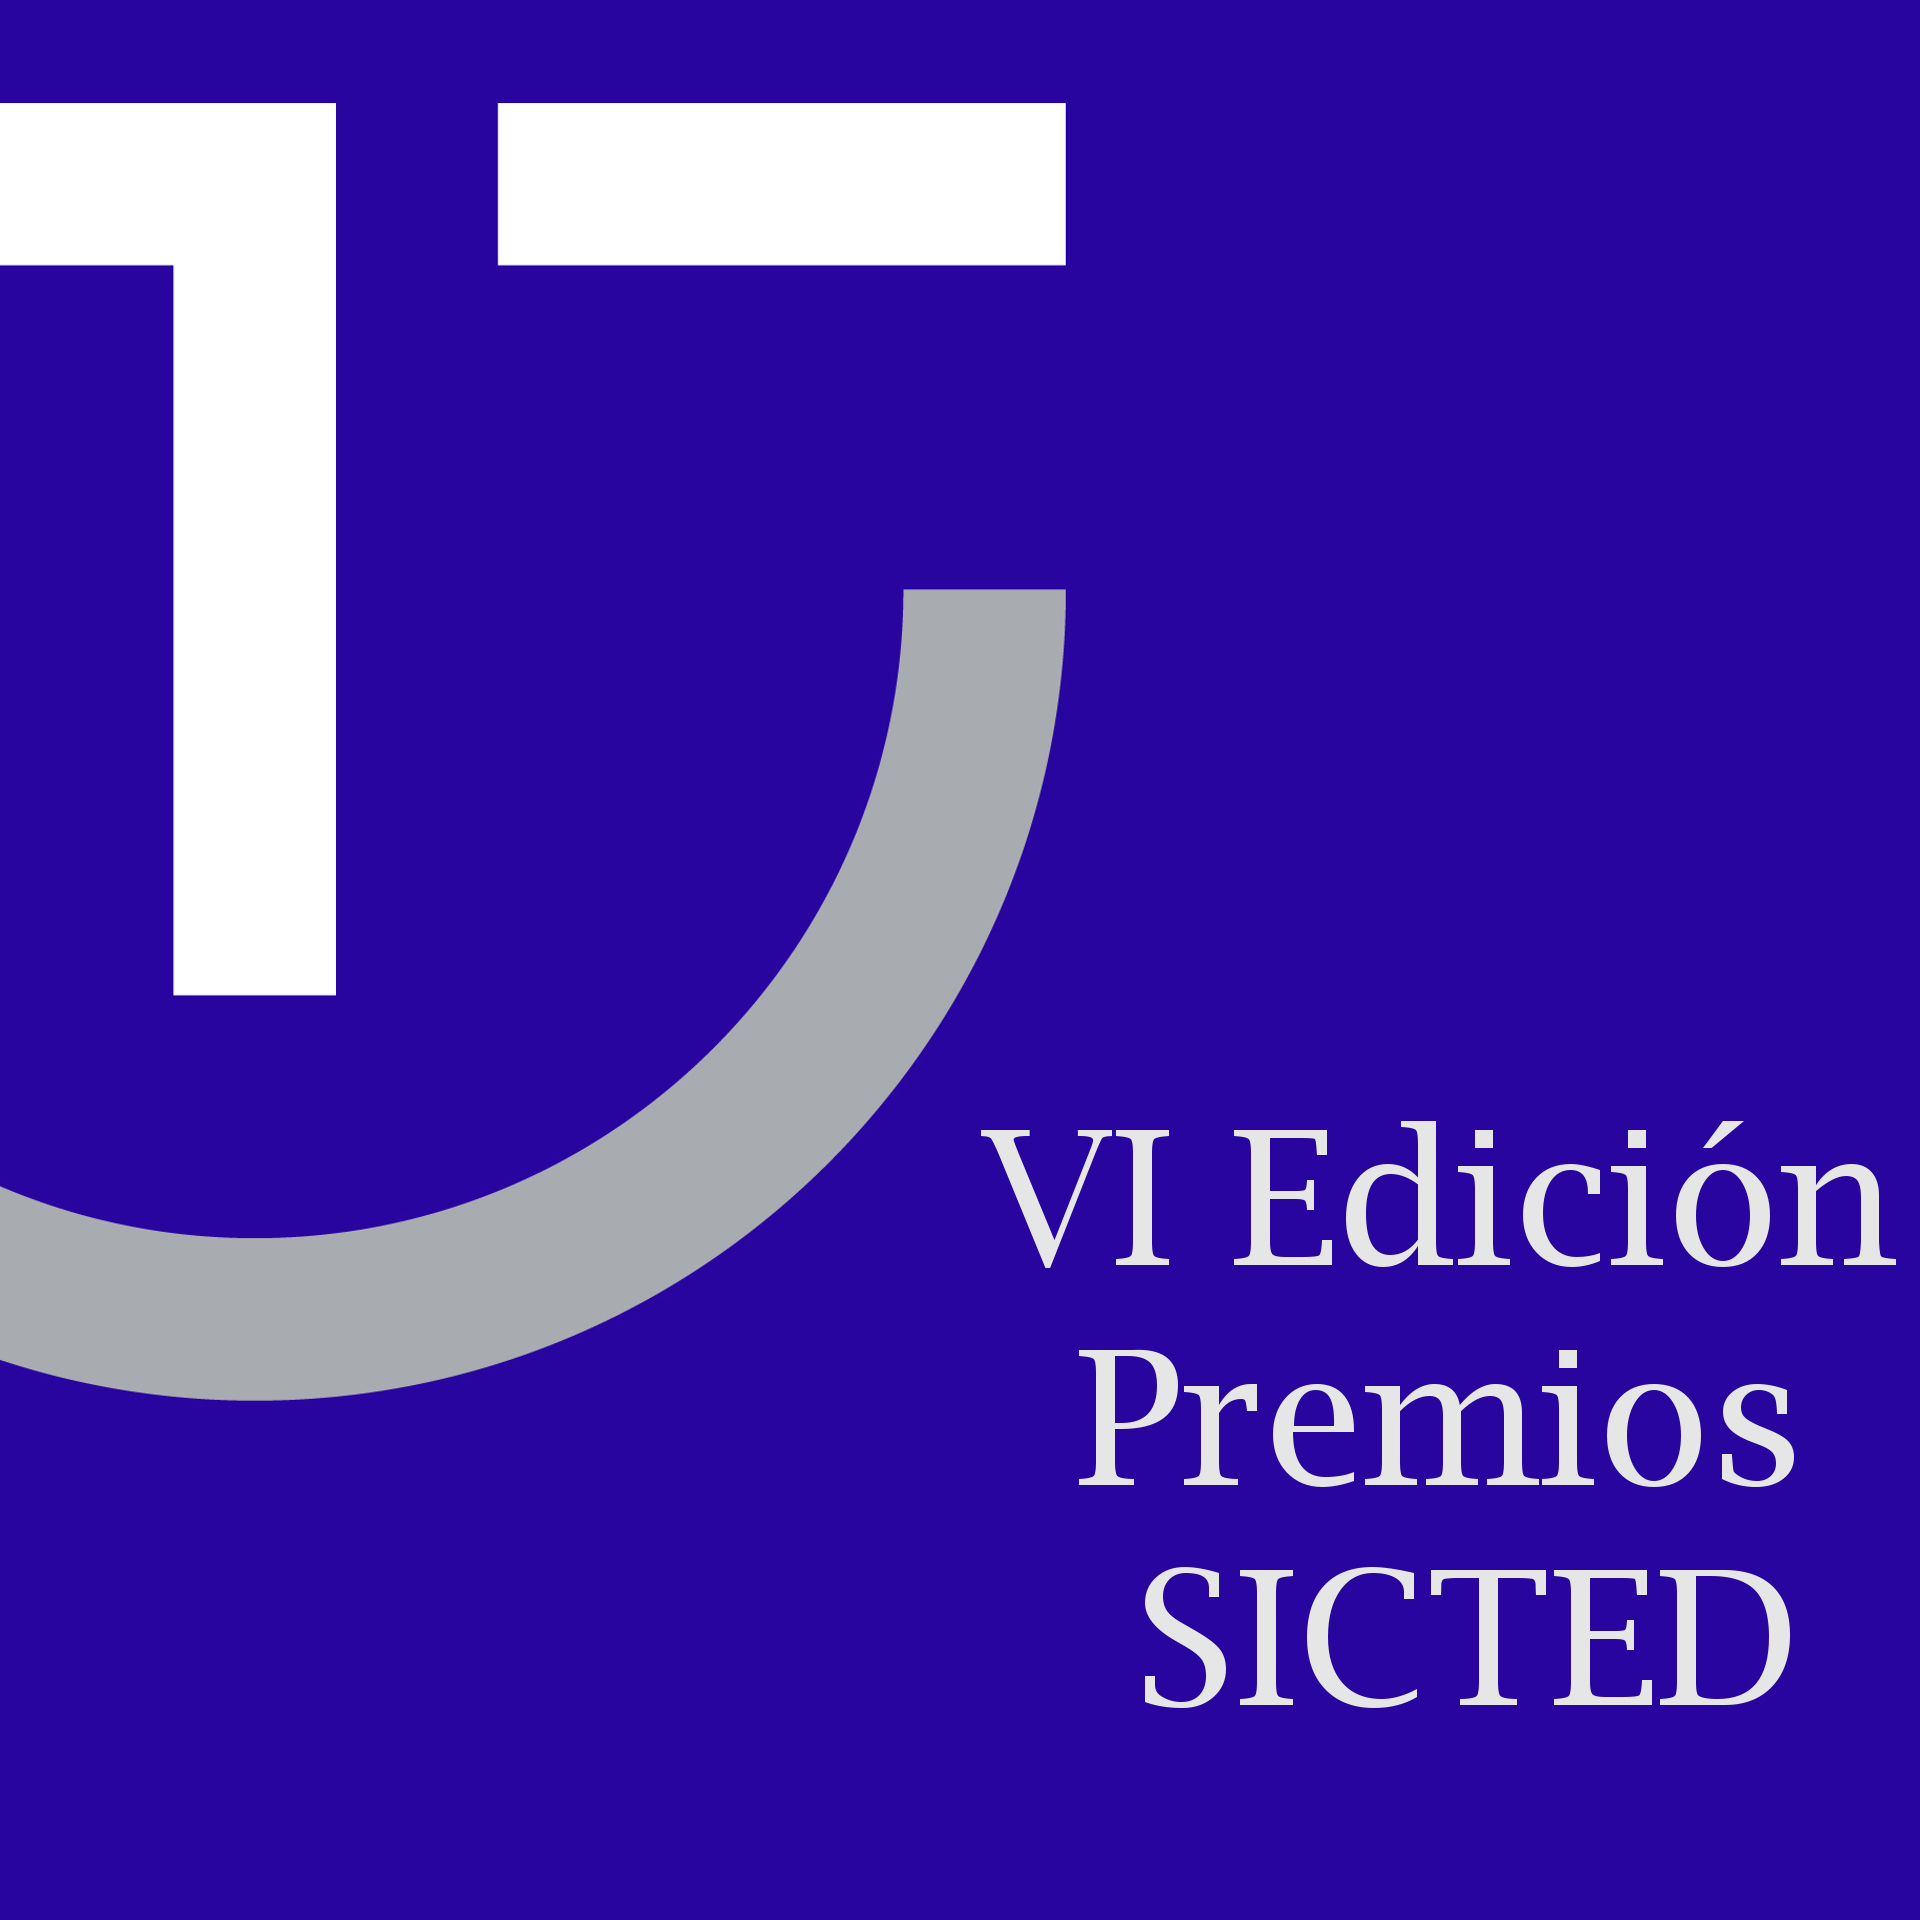 40b0982c 33df 42ea bf21 f2b9bb9d4853 VI Edición de los premios SICTED